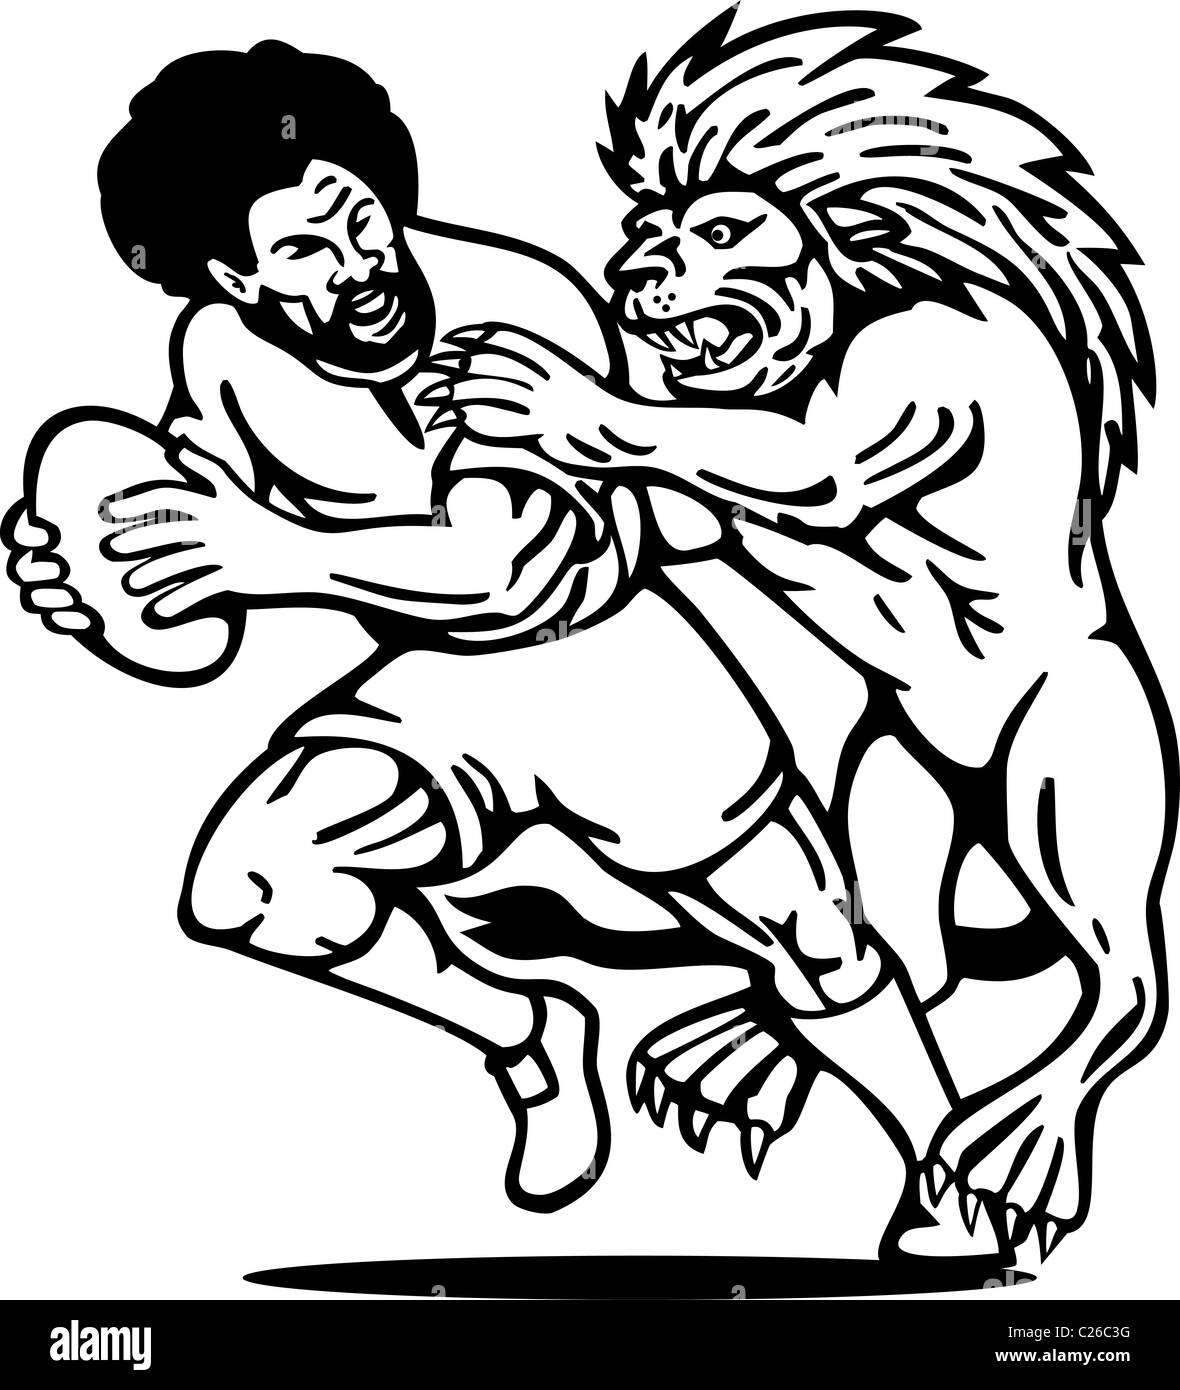 illustration of a Rugby player running with ball attack by lion done in black and white Stock Photo